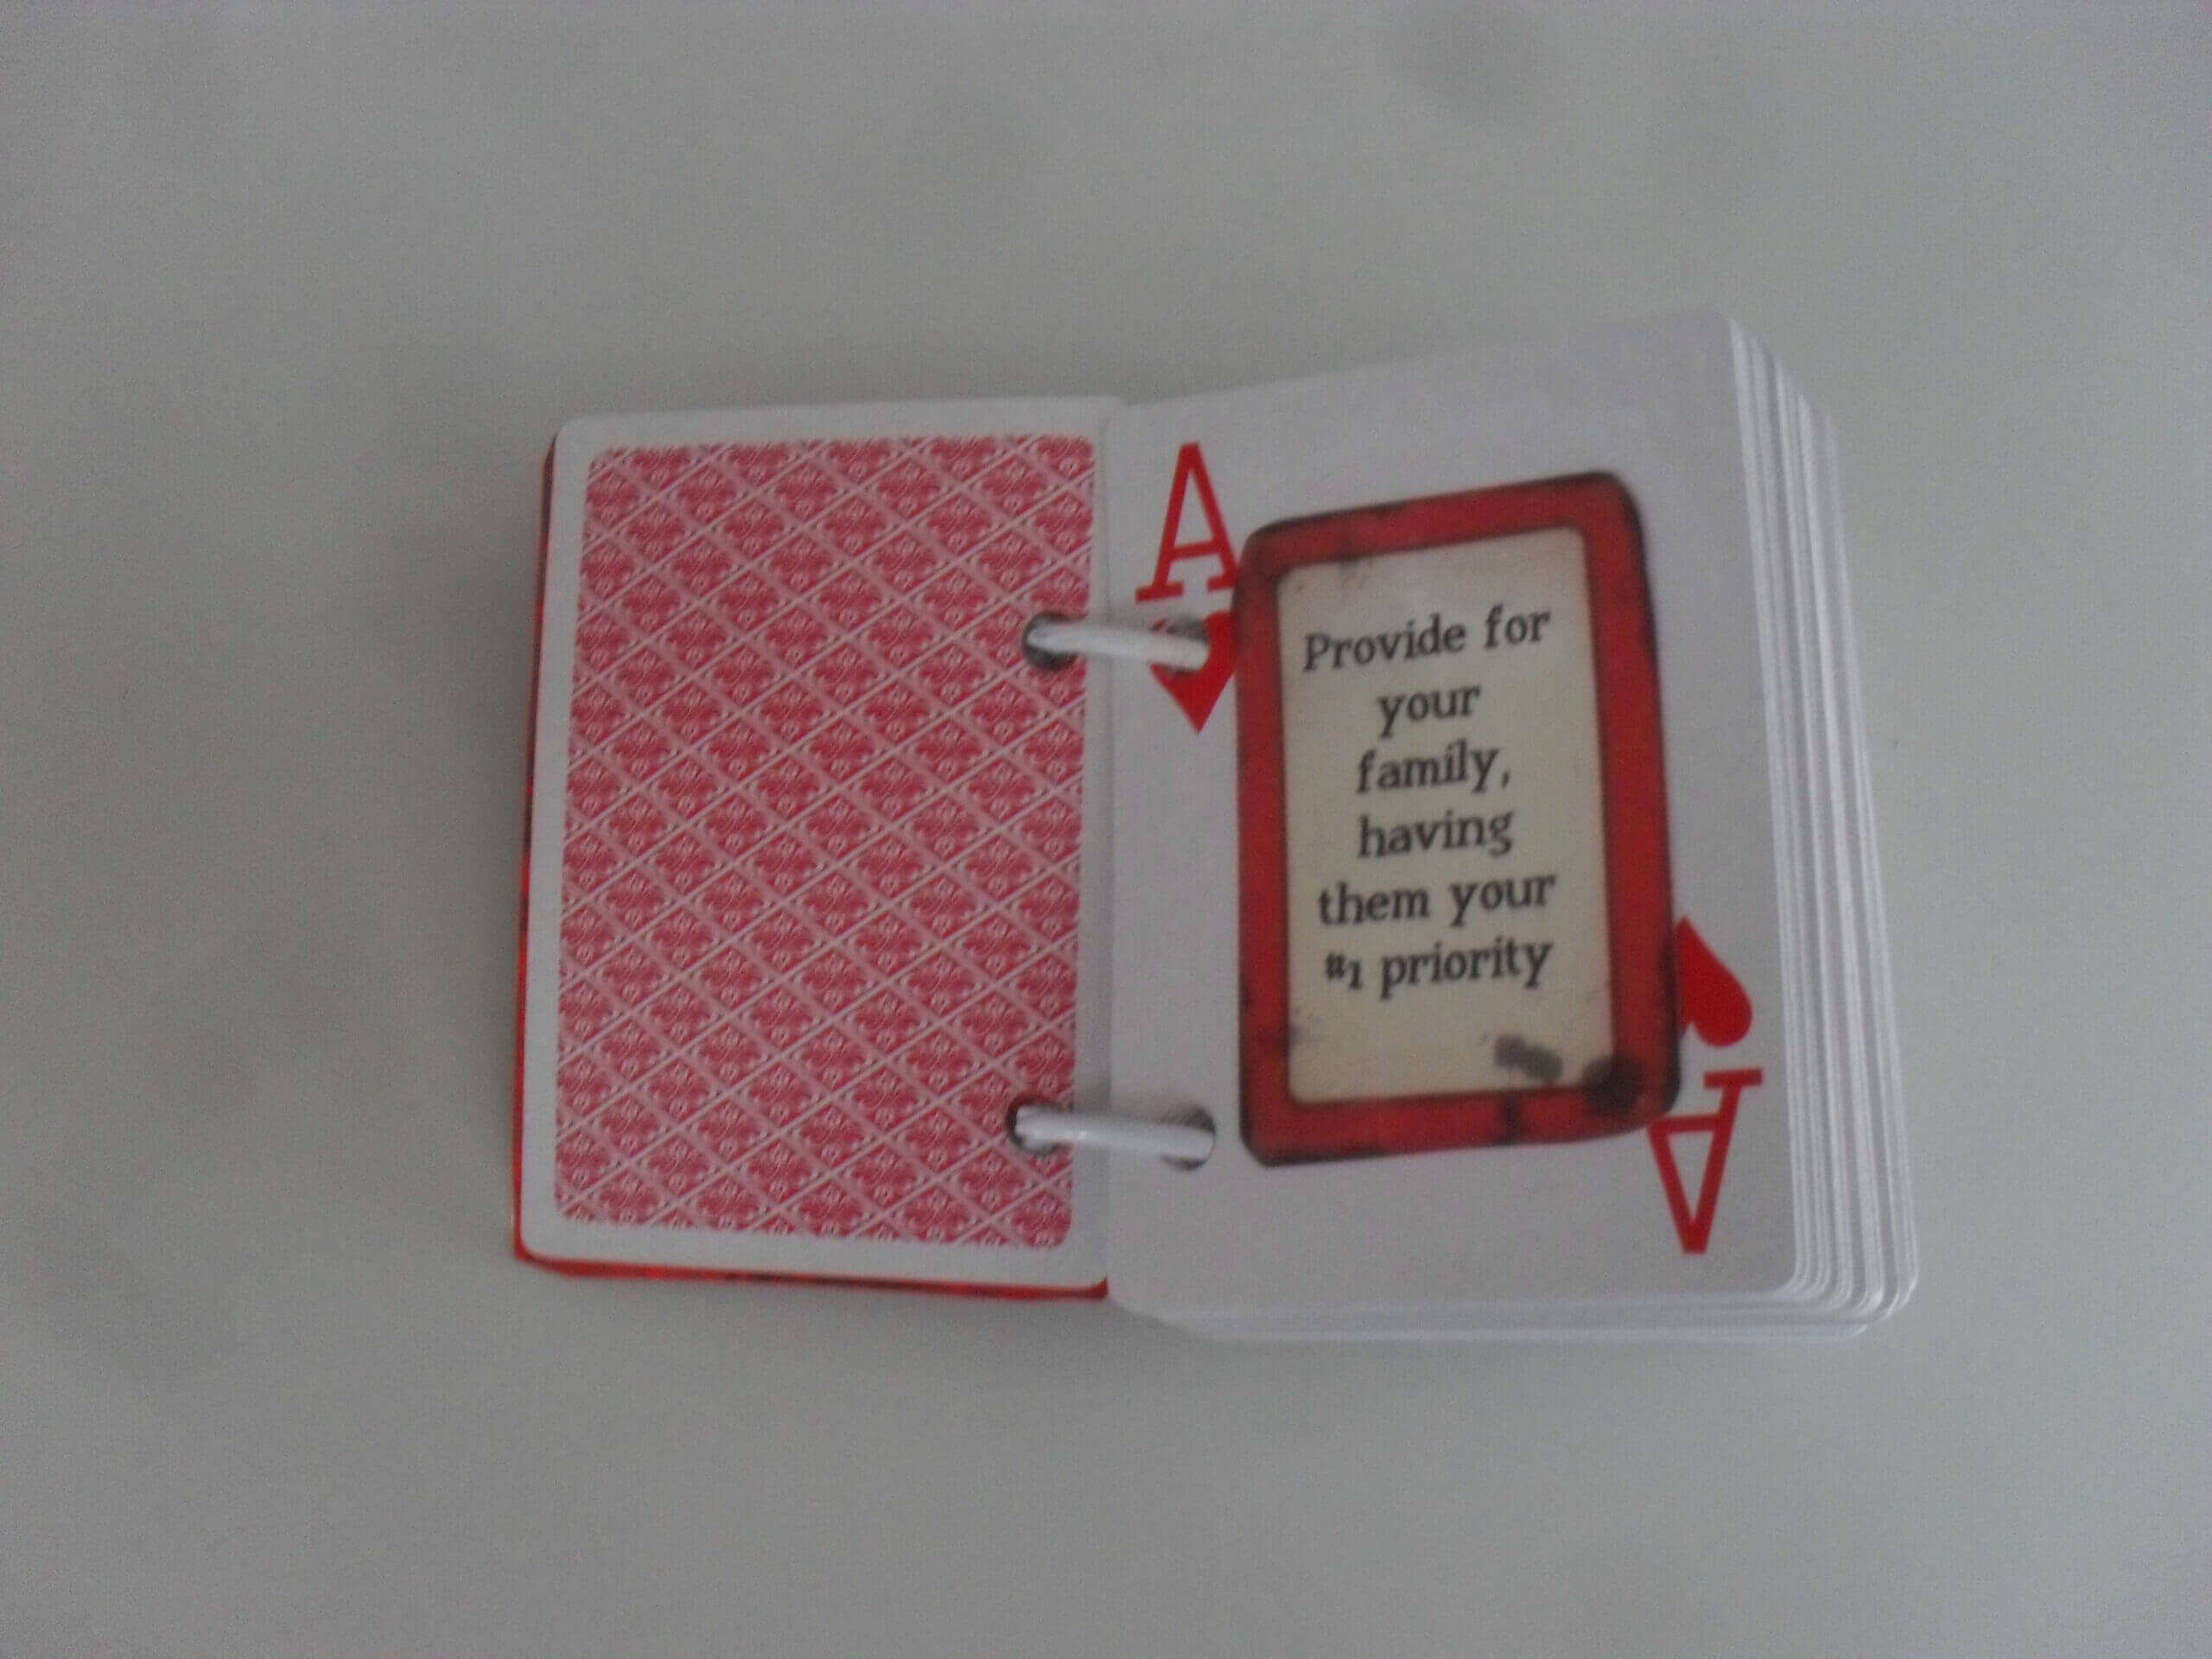 52 Reasons Why I Love You* | Tasteful Space Pertaining To 52 Things I Love About You Deck Of Cards Template